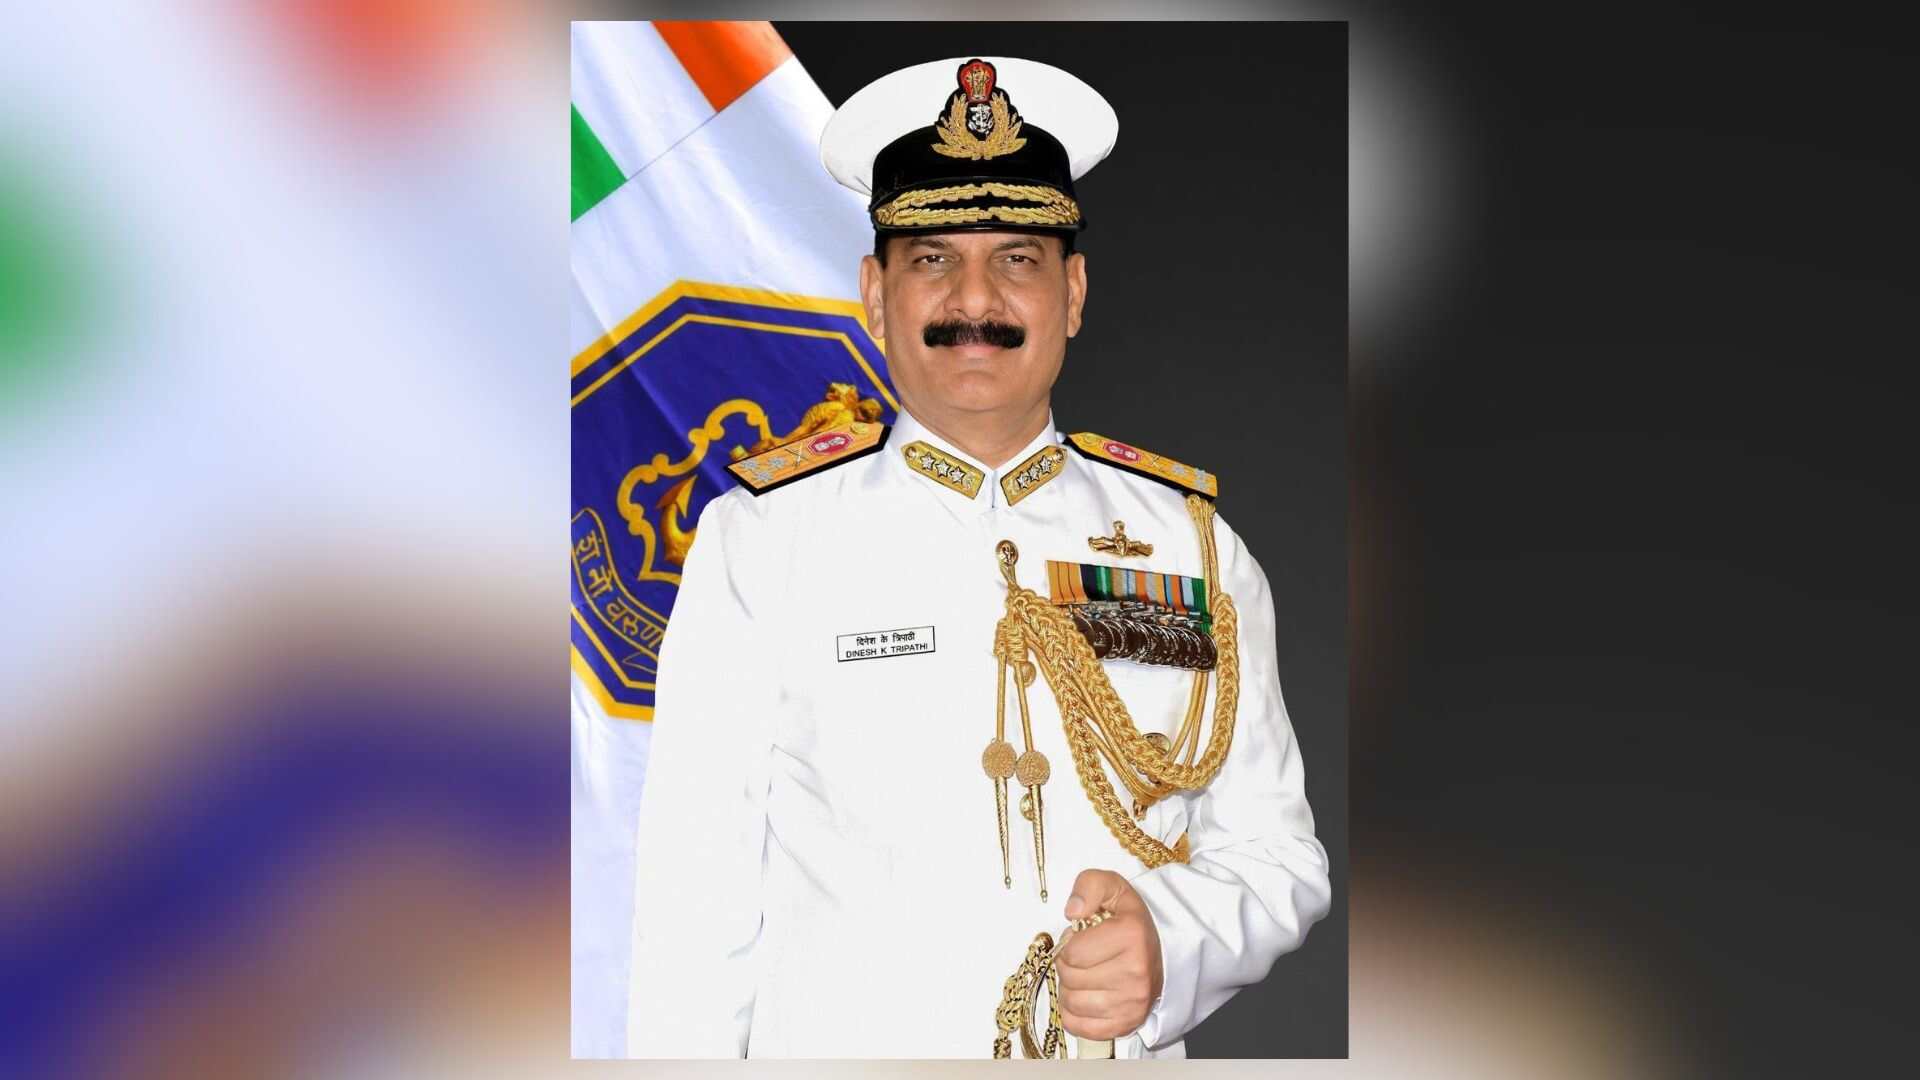 Admiral Dinesh K Tripathi On Tuesday Took Over As India's 26th Chief Of Naval Staff.